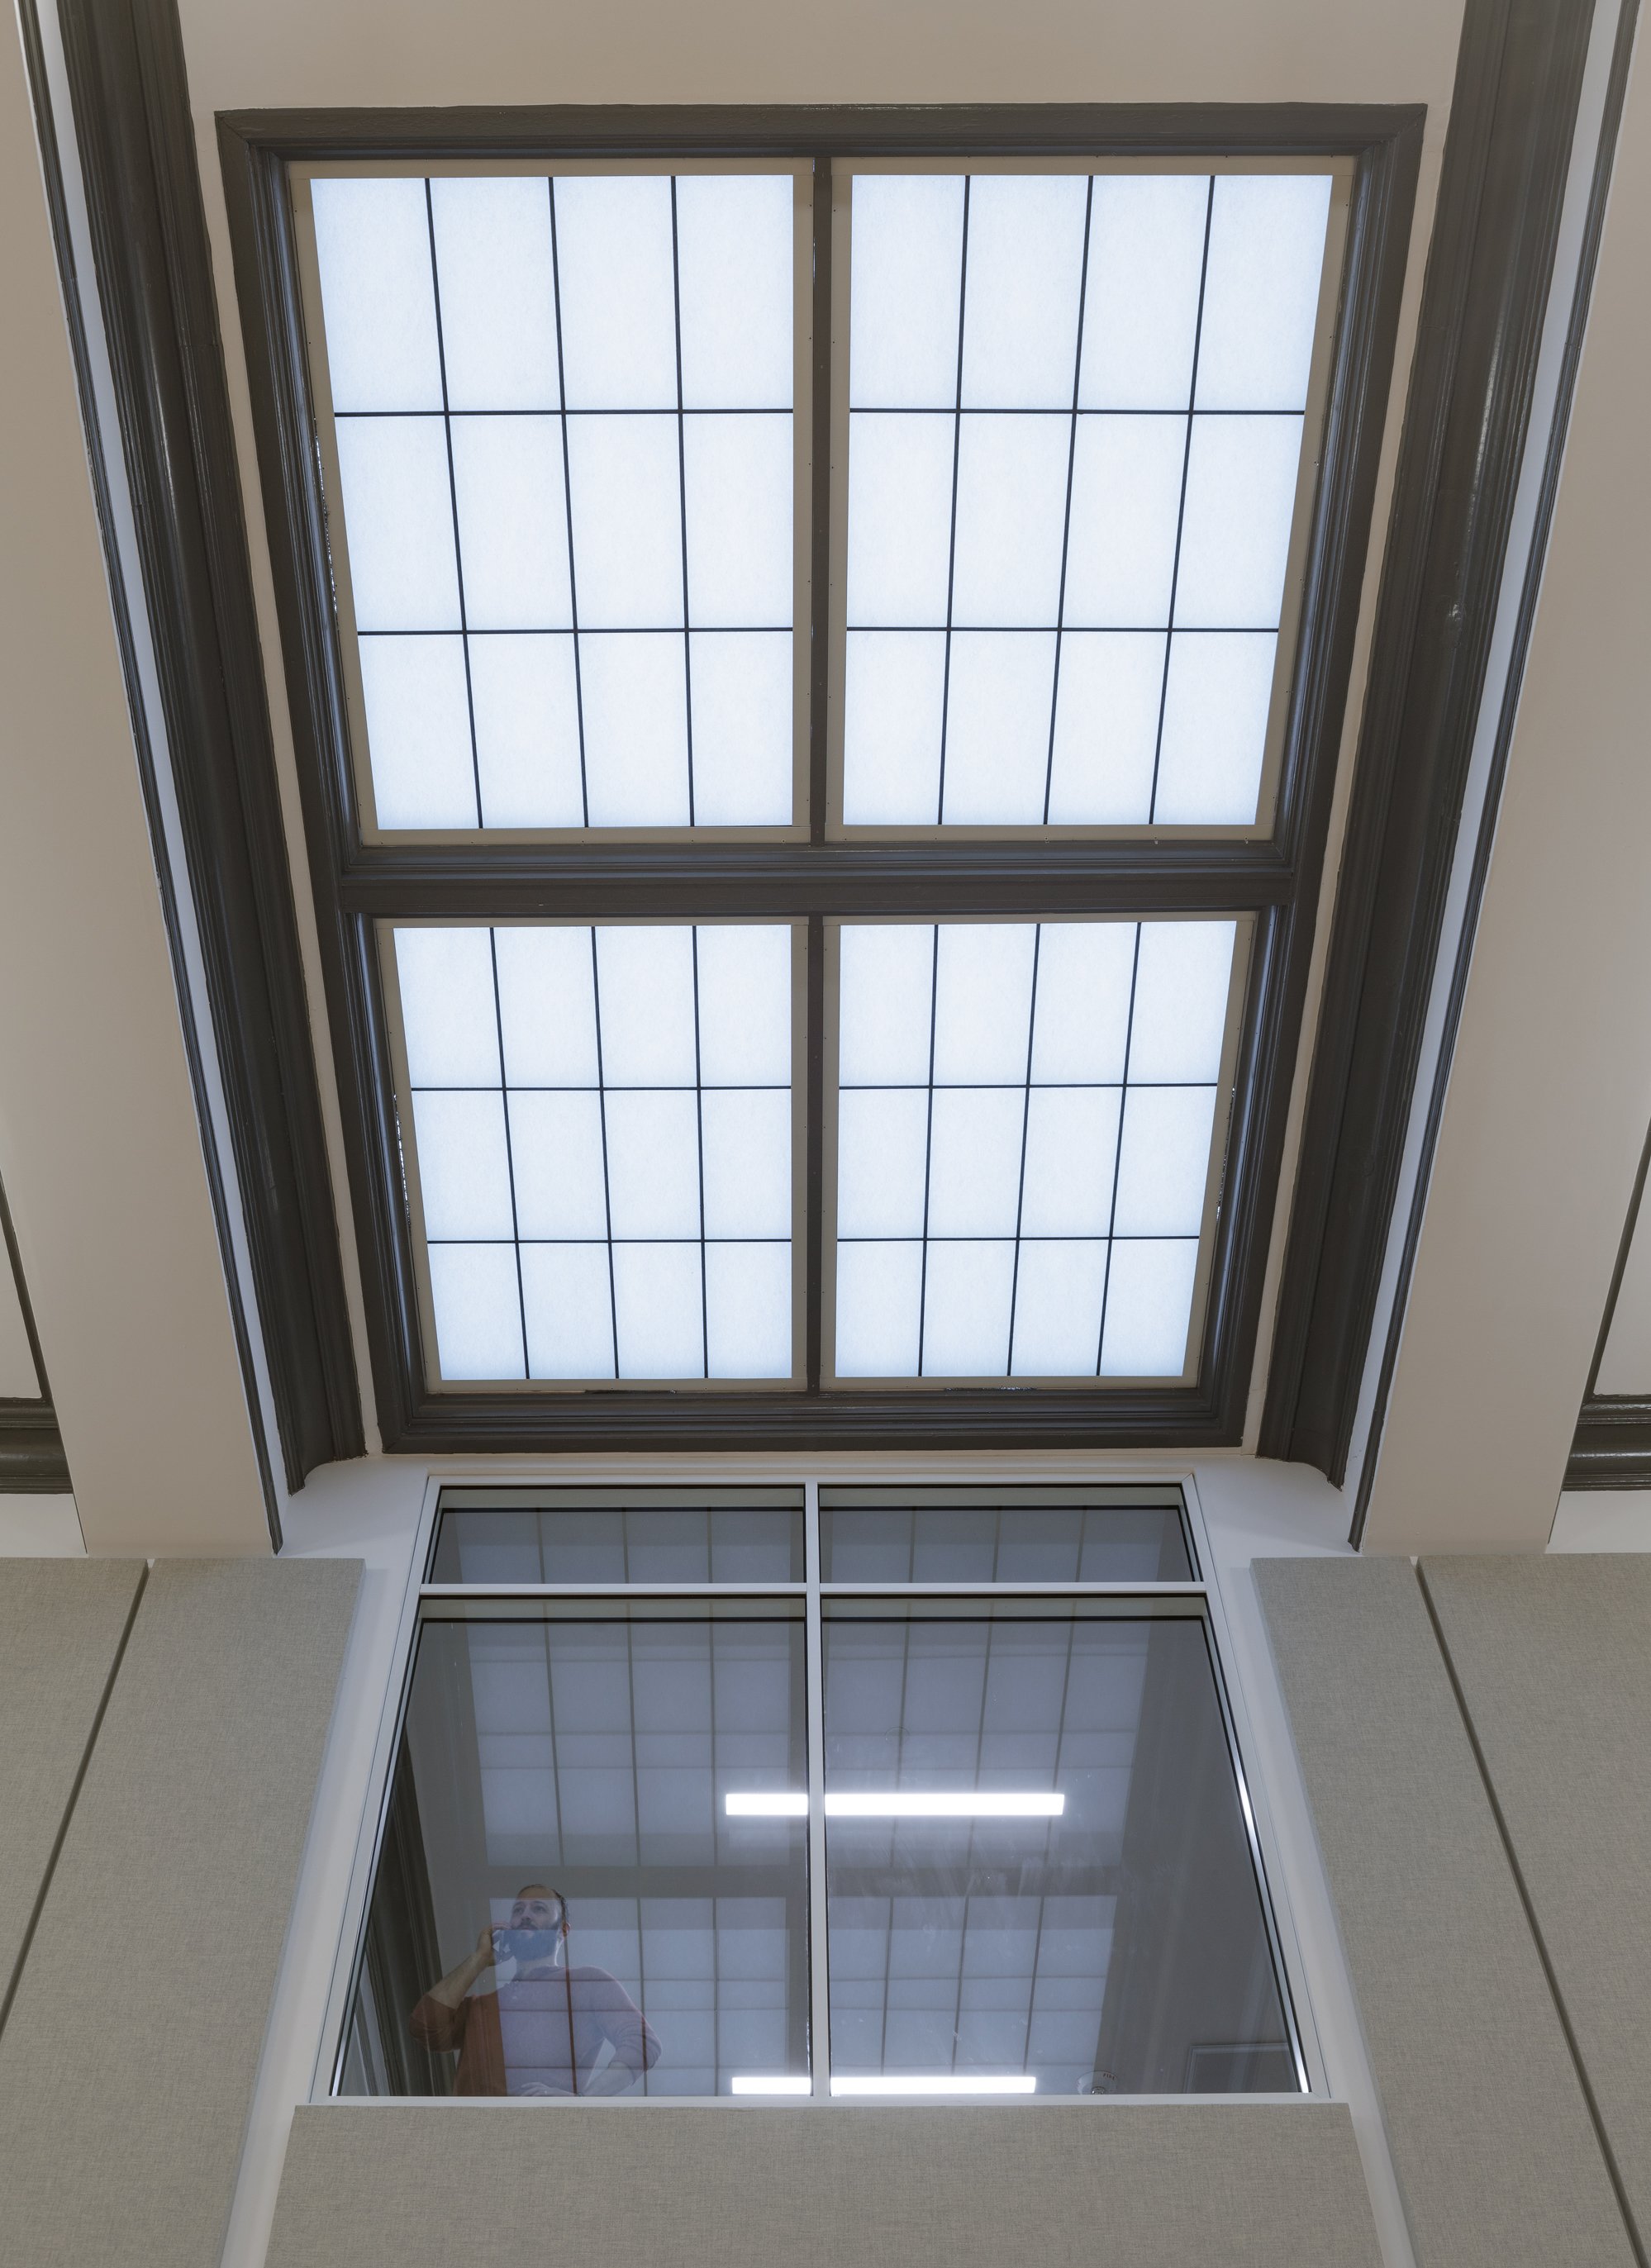 New skylights and interior acoustic windows spread natural daylight throughout 